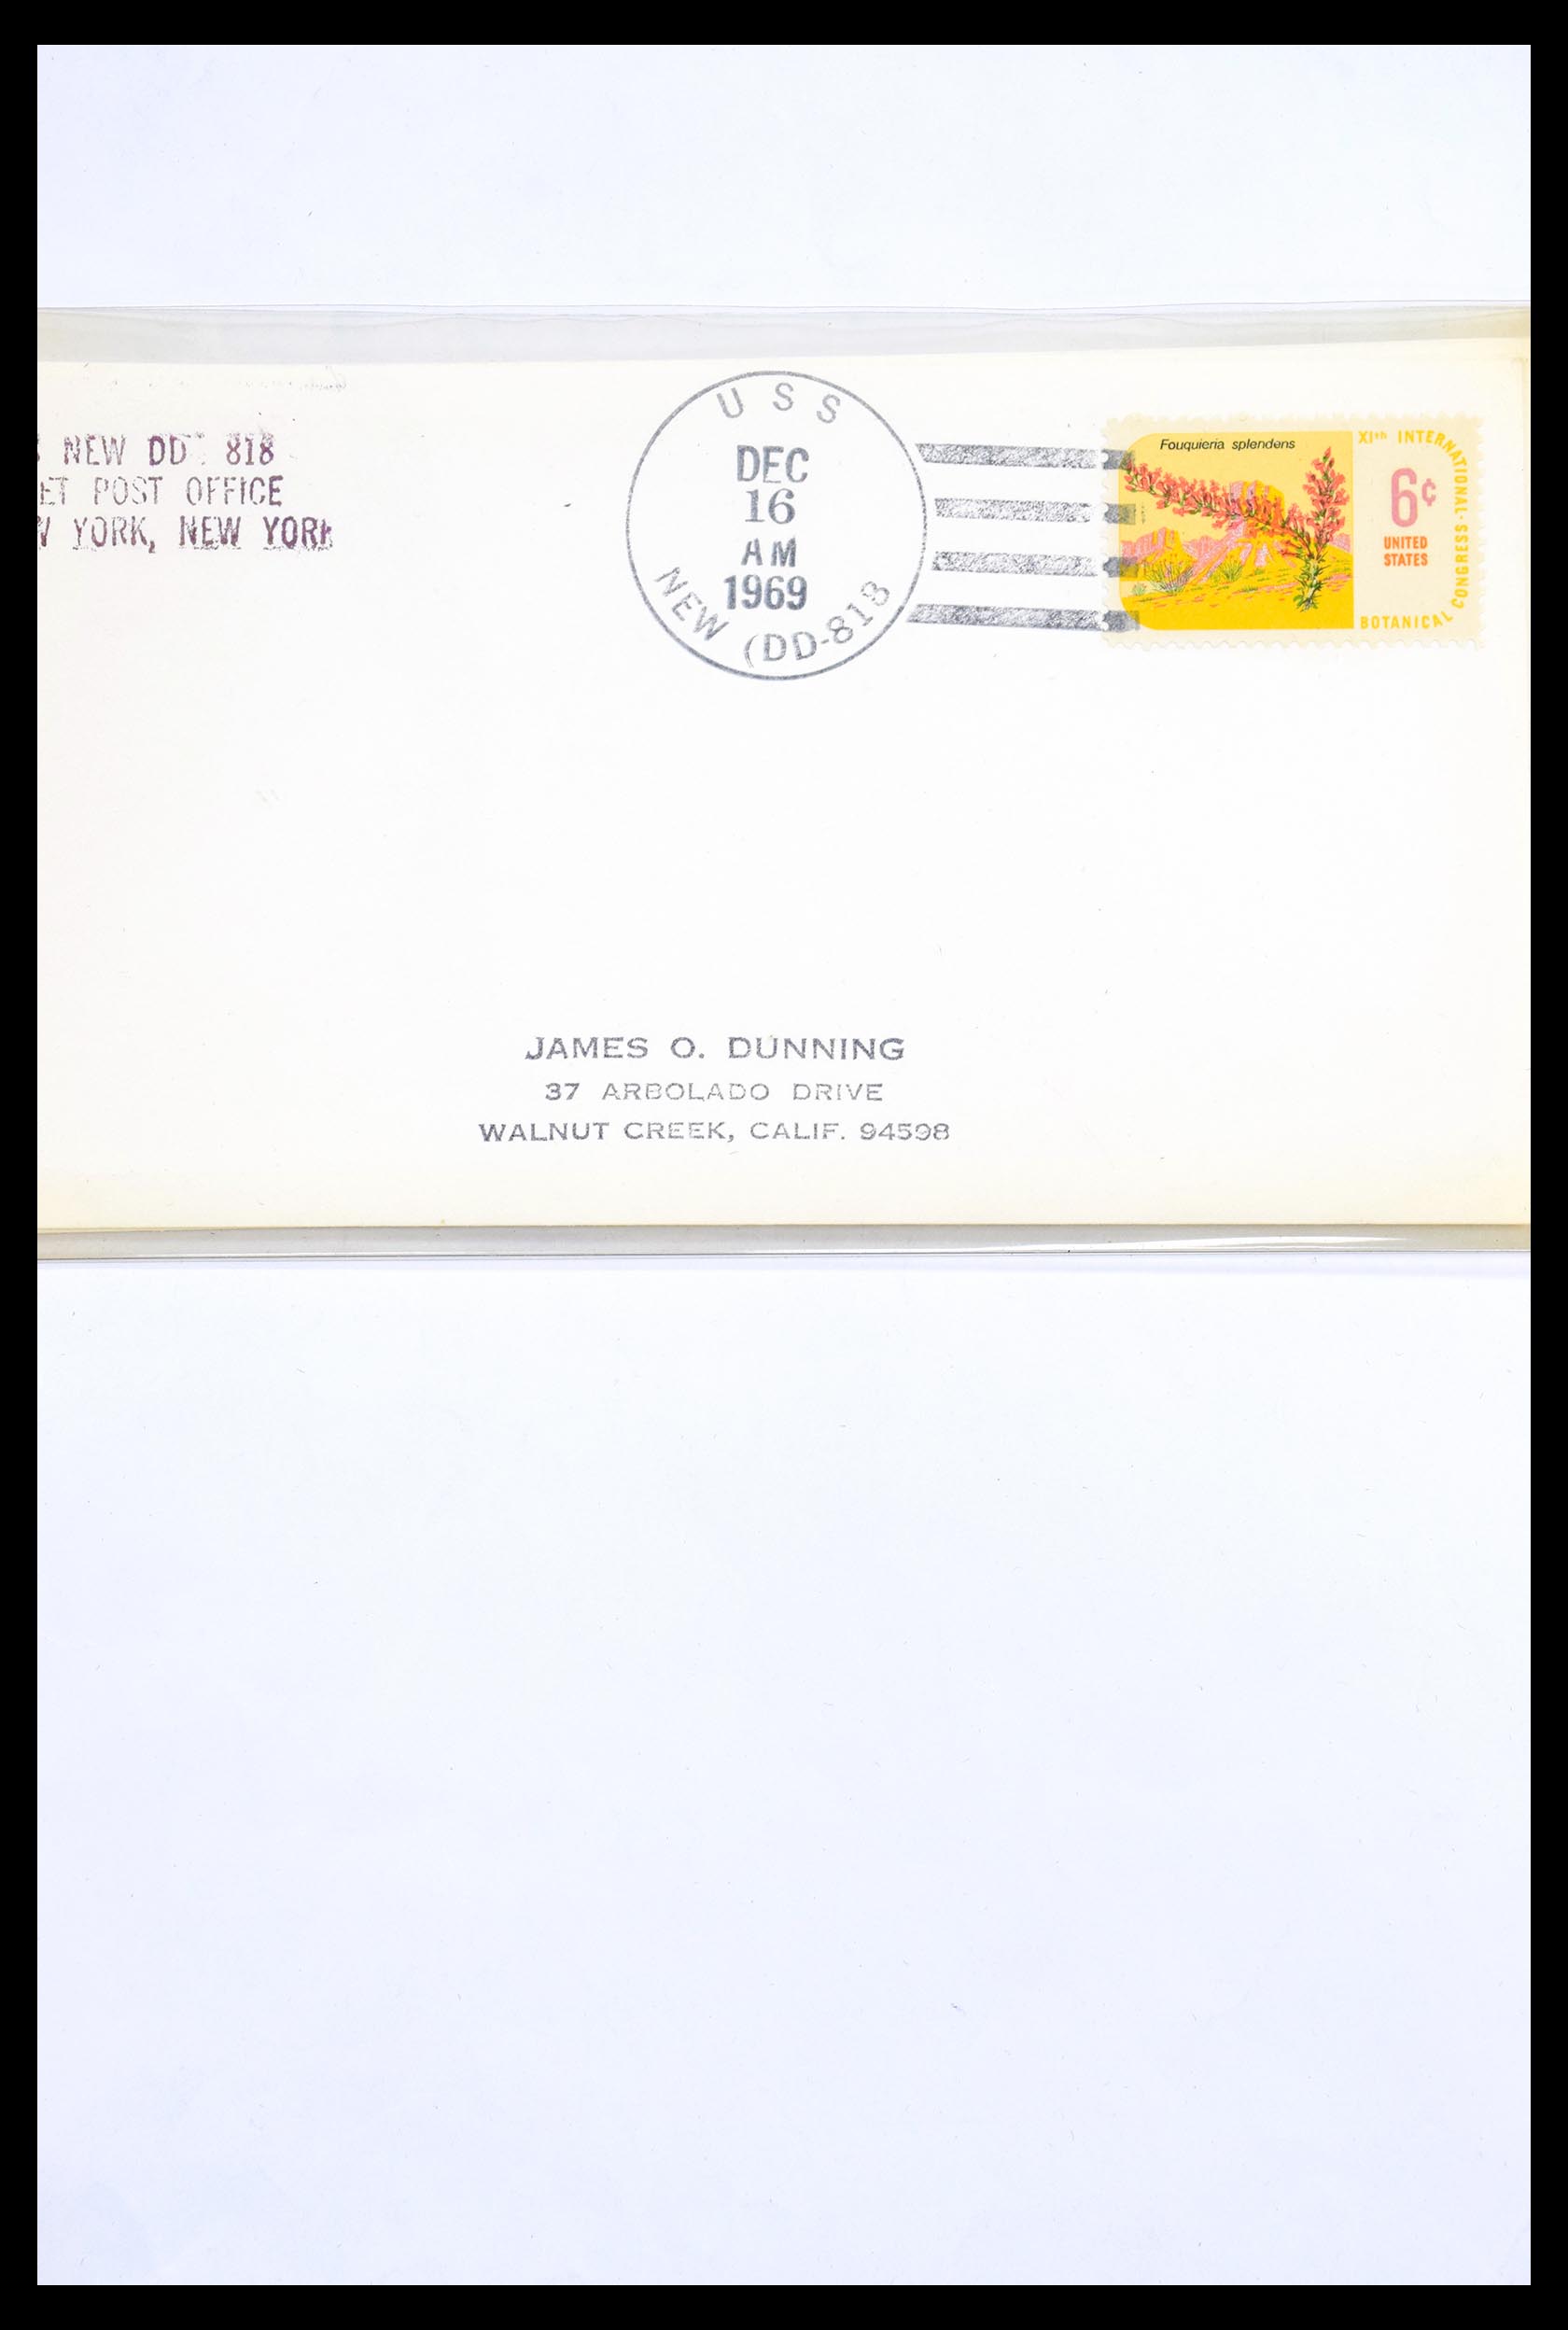 30341 296 - 30341 USA naval cover collection 1930-1970.